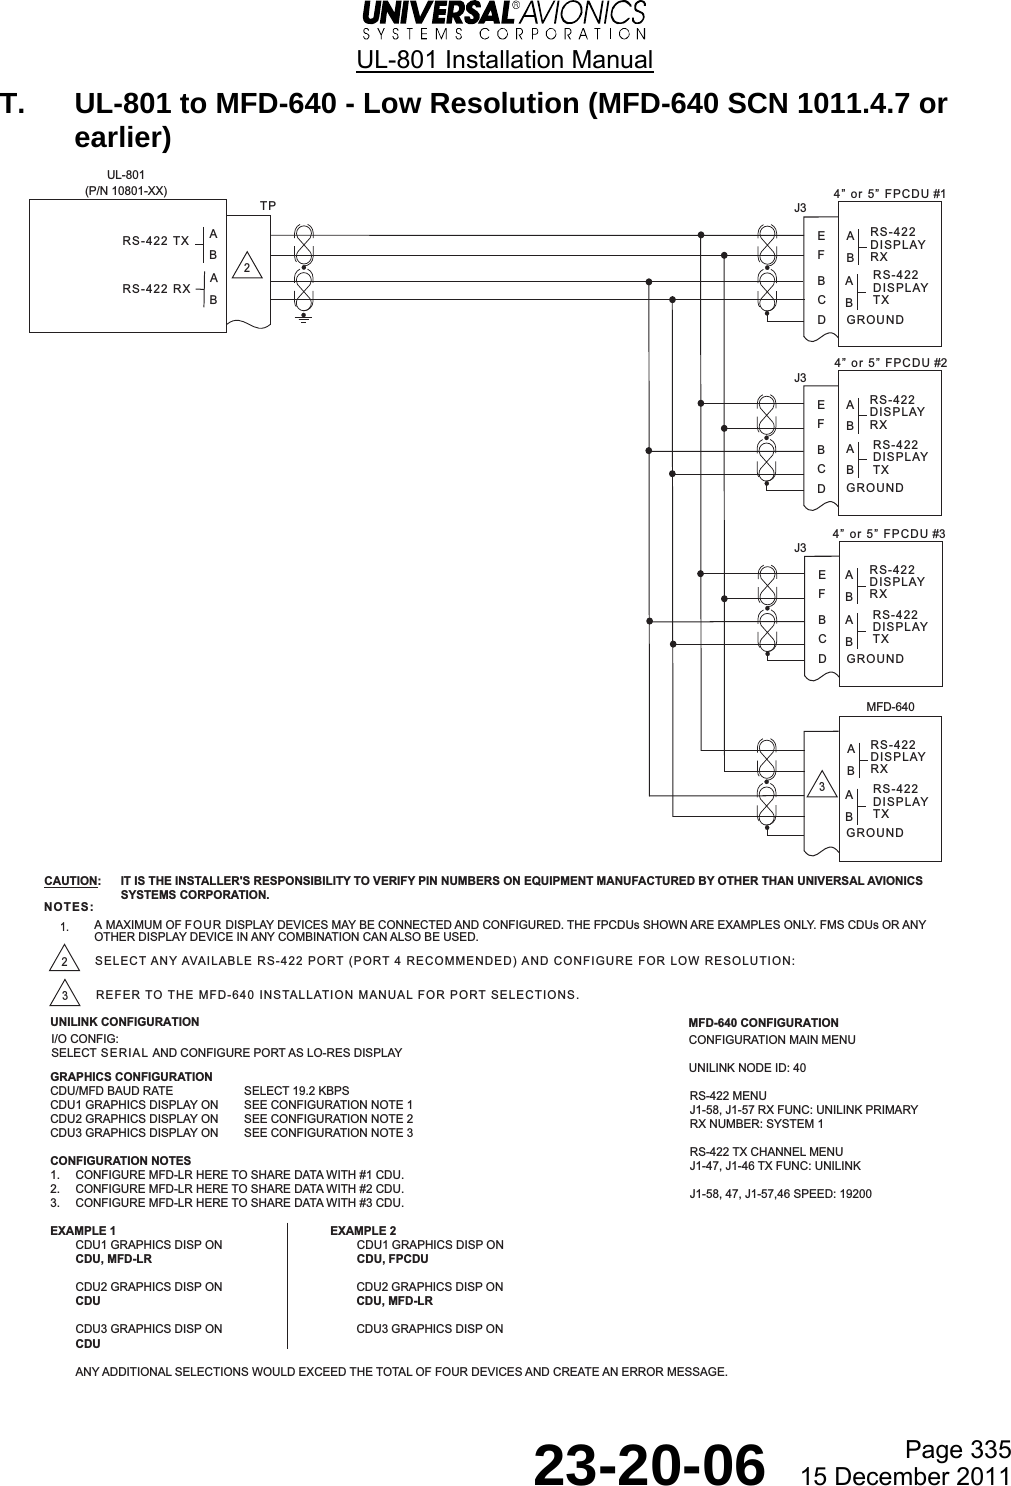  UL-801 Installation Manual  Page 335  23-20-06  15 December 2011 T.  UL-801 to MFD-640 - Low Resolution (MFD-640 SCN 1011.4.7 or earlier)    RS-422 TXTPUL-801(P/N 10801-XX)2RS-422 RXJ3EDCBFJ3EDCBFJ3EDCBFRS-422DISPLAYTXRS-422DISPLAYRXGROUNDRS-422DISPLAYTXRS-422DISPLAYRXGROUNDRS-422DISPLAYTXRS-422DISPLAYRXGROUNDRS-422DISPLAYTXRS-422DISPLAYRXGROUND4 or 5 FPCDU #14 or 5 FPCDU #2MFD-6404 or 5 FPCDU #3NOTES:1.A MAXIMUM OF FOUR DISPLAY DEVICES MAY BE CONNECTED AND CONFIGURED. THE FPCDUs SHOWN ARE EXAMPLES ONLY. FMS CDUs OR ANYOTHER DISPLAY DEVICE IN ANY COMBINATION CAN ALSO BE USED.2SELECT ANY AVAILABLE RS-422 PORT (PORT 4 RECOMMENDED) AND CONFIGURE FOR LOW RESOLUTION:CAUTION:  IT IS THE INSTALLER&apos;S RESPONSIBILITY TO VERIFY PIN NUMBERS ON EQUIPMENT MANUFACTURED BY OTHER THAN UNIVERSAL AVIONICS SYSTEMS CORPORATION.SELECT SERIAL AND CONFIGURE PORT AS LO-RES DISPLAYI/O CONFIG:UNILINK CONFIGURATIONGRAPHICS CONFIGURATIONCDU/MFD BAUD RATE SELECT 19.2 KBPSCDU1 GRAPHICS DISPLAY ON SEE CONFIGURATION NOTE 1CDU2 GRAPHICS DISPLAY ON SEE CONFIGURATION NOTE 2CDU3 GRAPHICS DISPLAY ON SEE CONFIGURATION NOTE 3CONFIGURATION NOTES1. CONFIGURE MFD-LR HERE TO SHARE DATA WITH #1 CDU.2. CONFIGURE MFD-LR HERE TO SHARE DATA WITH #2 CDU.3. CONFIGURE MFD-LR HERE TO SHARE DATA WITH #3 CDU.EXAMPLE 1 EXAMPLE 2CDU1 GRAPHICS DISP ON CDU1 GRAPHICS DISP ONCDU, MFD-LR CDU, FPCDUCDU2 GRAPHICS DISP ON CDU2 GRAPHICS DISP ONCDU CDU, MFD-LRCDU3 GRAPHICS DISP ON CDU3 GRAPHICS DISP ONCDUANY ADDITIONAL SELECTIONS WOULD EXCEED THE TOTAL OF FOUR DEVICES AND CREATE AN ERROR MESSAGE.ABABABABABABABABABAB33REFER TO THE MFD-640 INSTALLATION MANUAL FOR PORT SELECTIONS.RS-422 MENUJ1-58, J1-57 RX FUNC: UNILINK PRIMARYRX NUMBER: SYSTEM 1RS-422 TX CHANNEL MENUJ1-47, J1-46 TX FUNC: UNILINKJ1-58, 47, J1-57,46 SPEED: 19200MFD-640 CONFIGURATIONCONFIGURATION MAIN MENUUNILINK NODE ID: 40